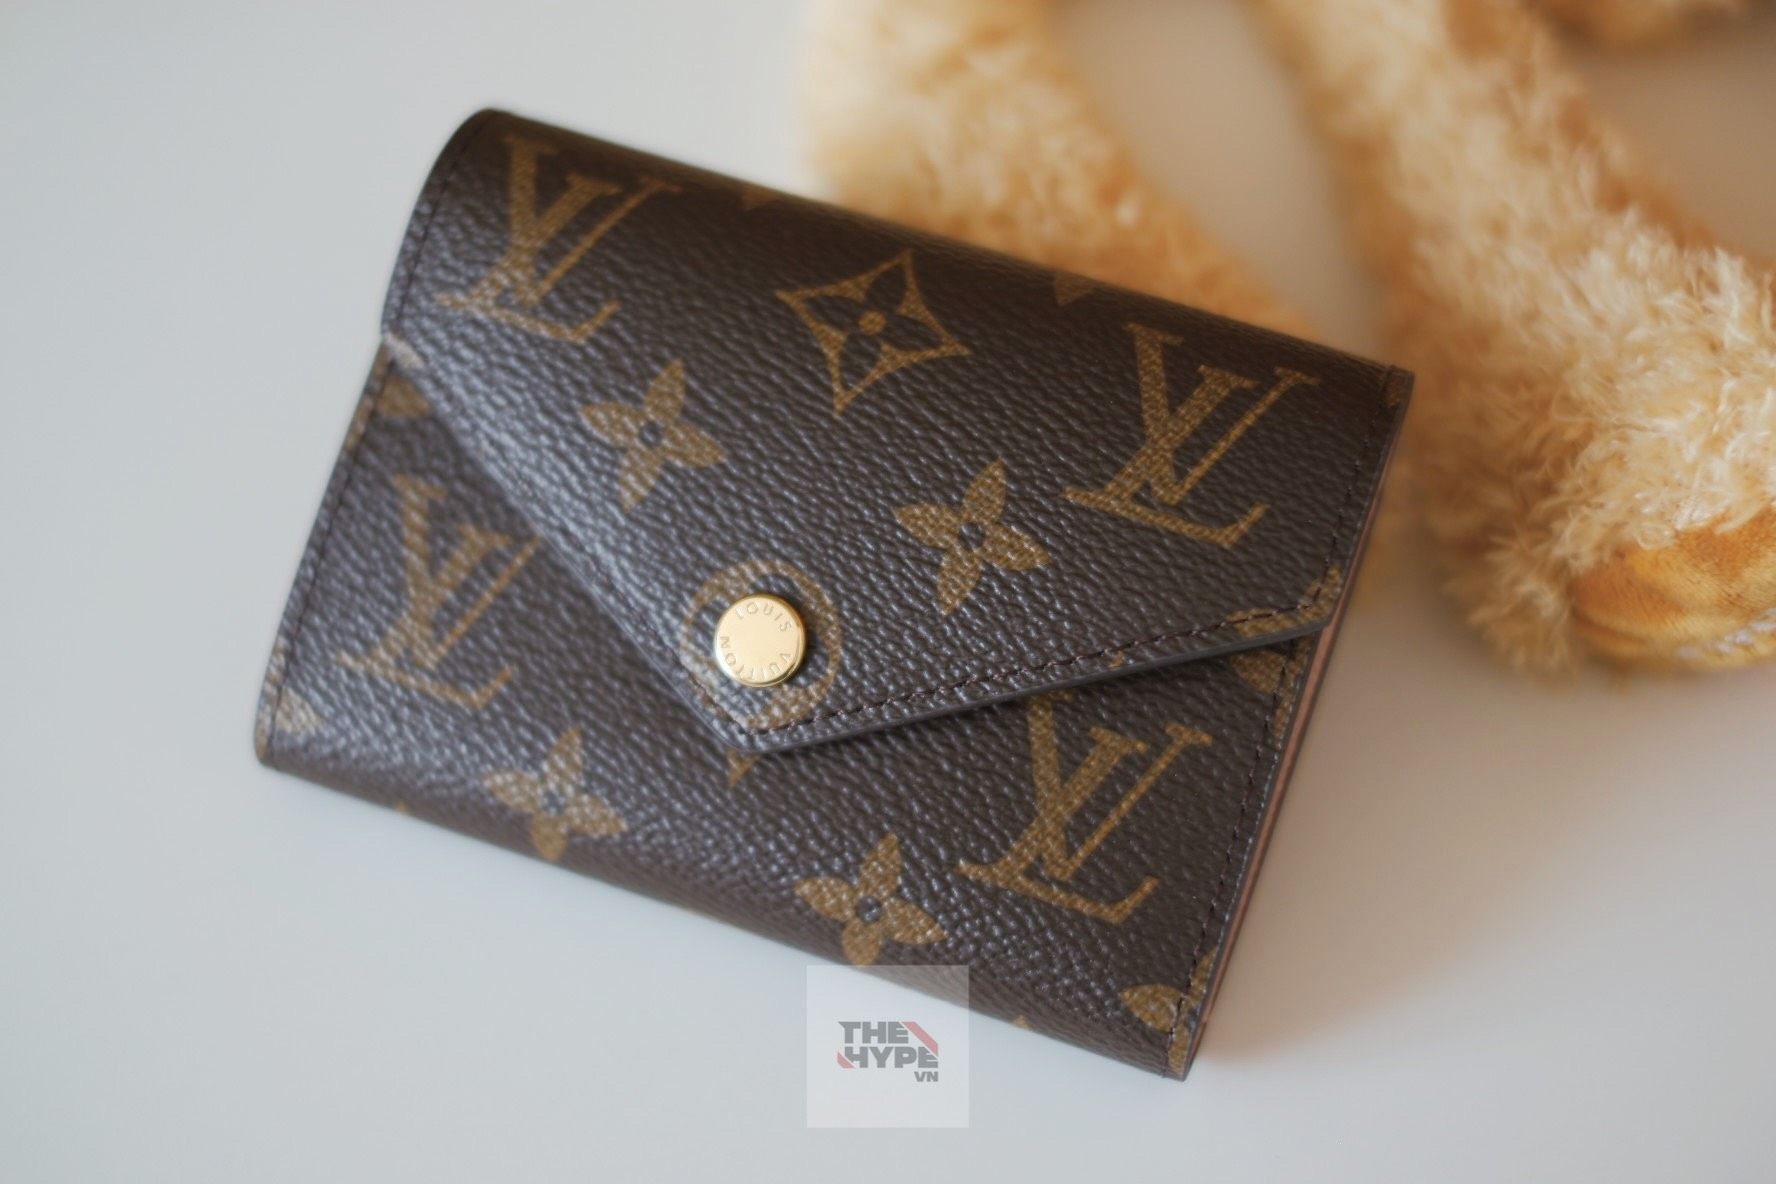 Lv Check Wallet Best Price In Pakistan, Rs 2800